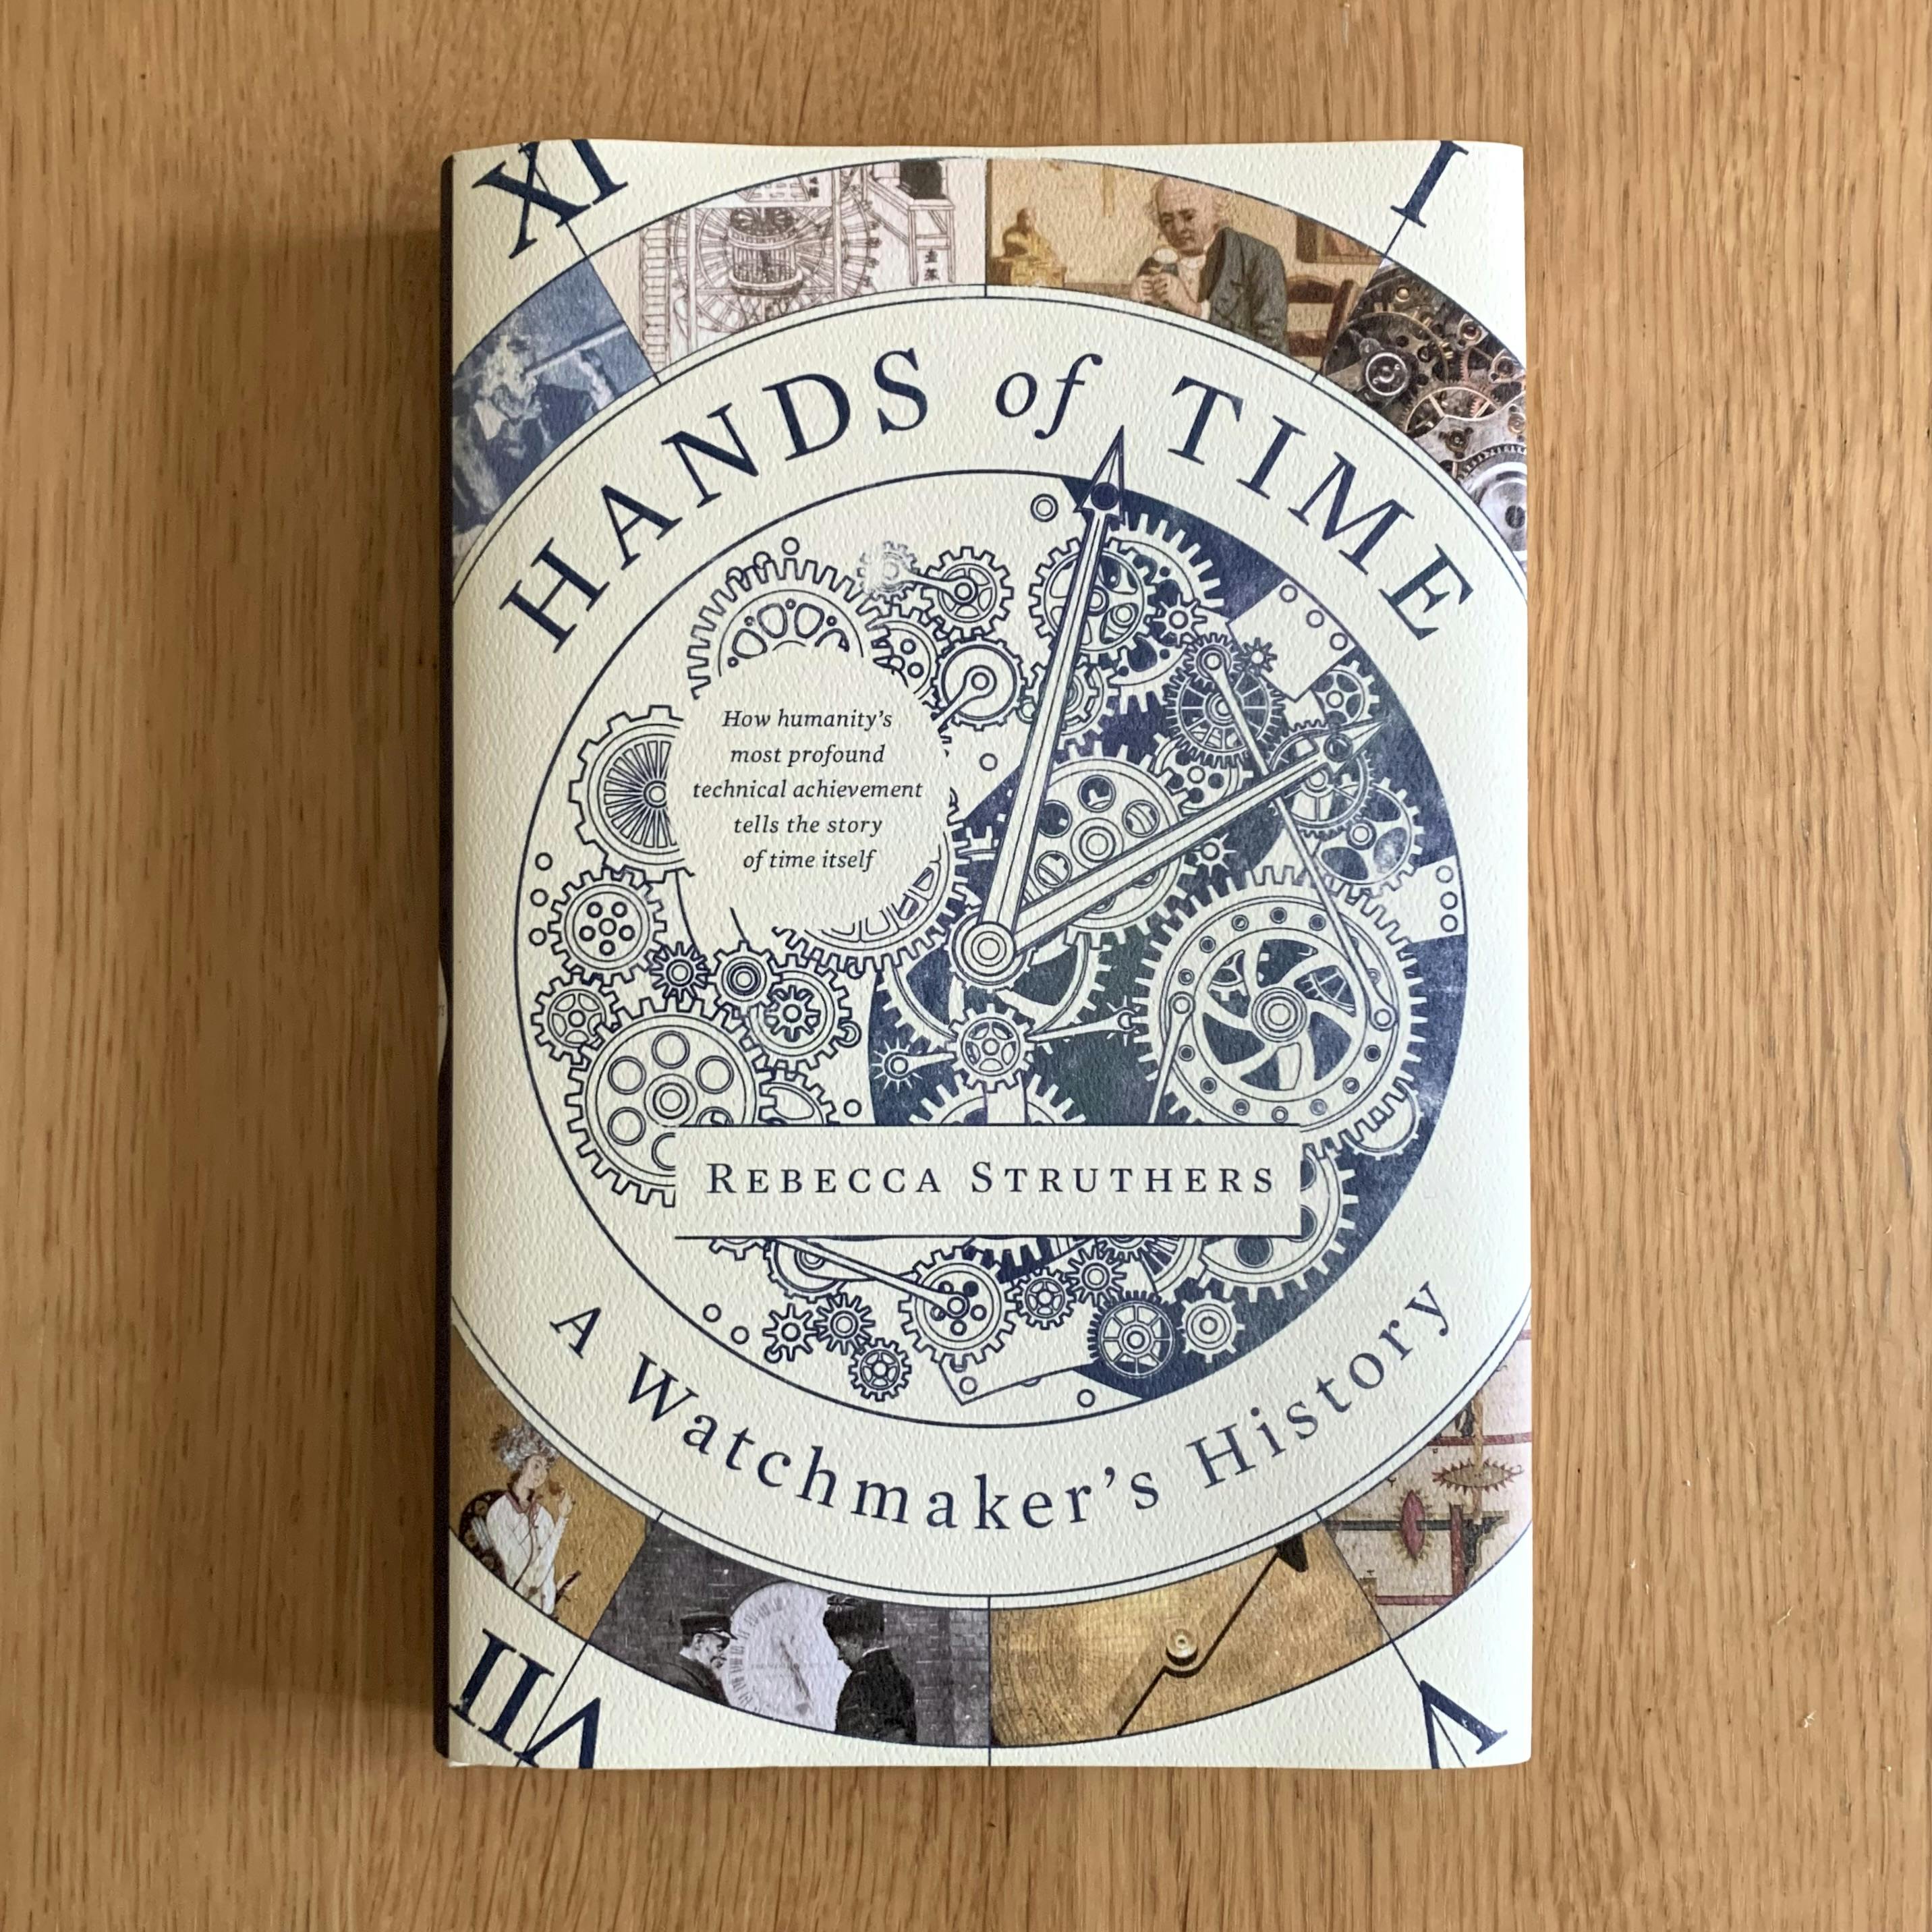 The cover of my copy of Rebecca Struthers’ Hands of Time: A Watchmaker’s History. The book, a hardcover edition, rests on a wooden surface.